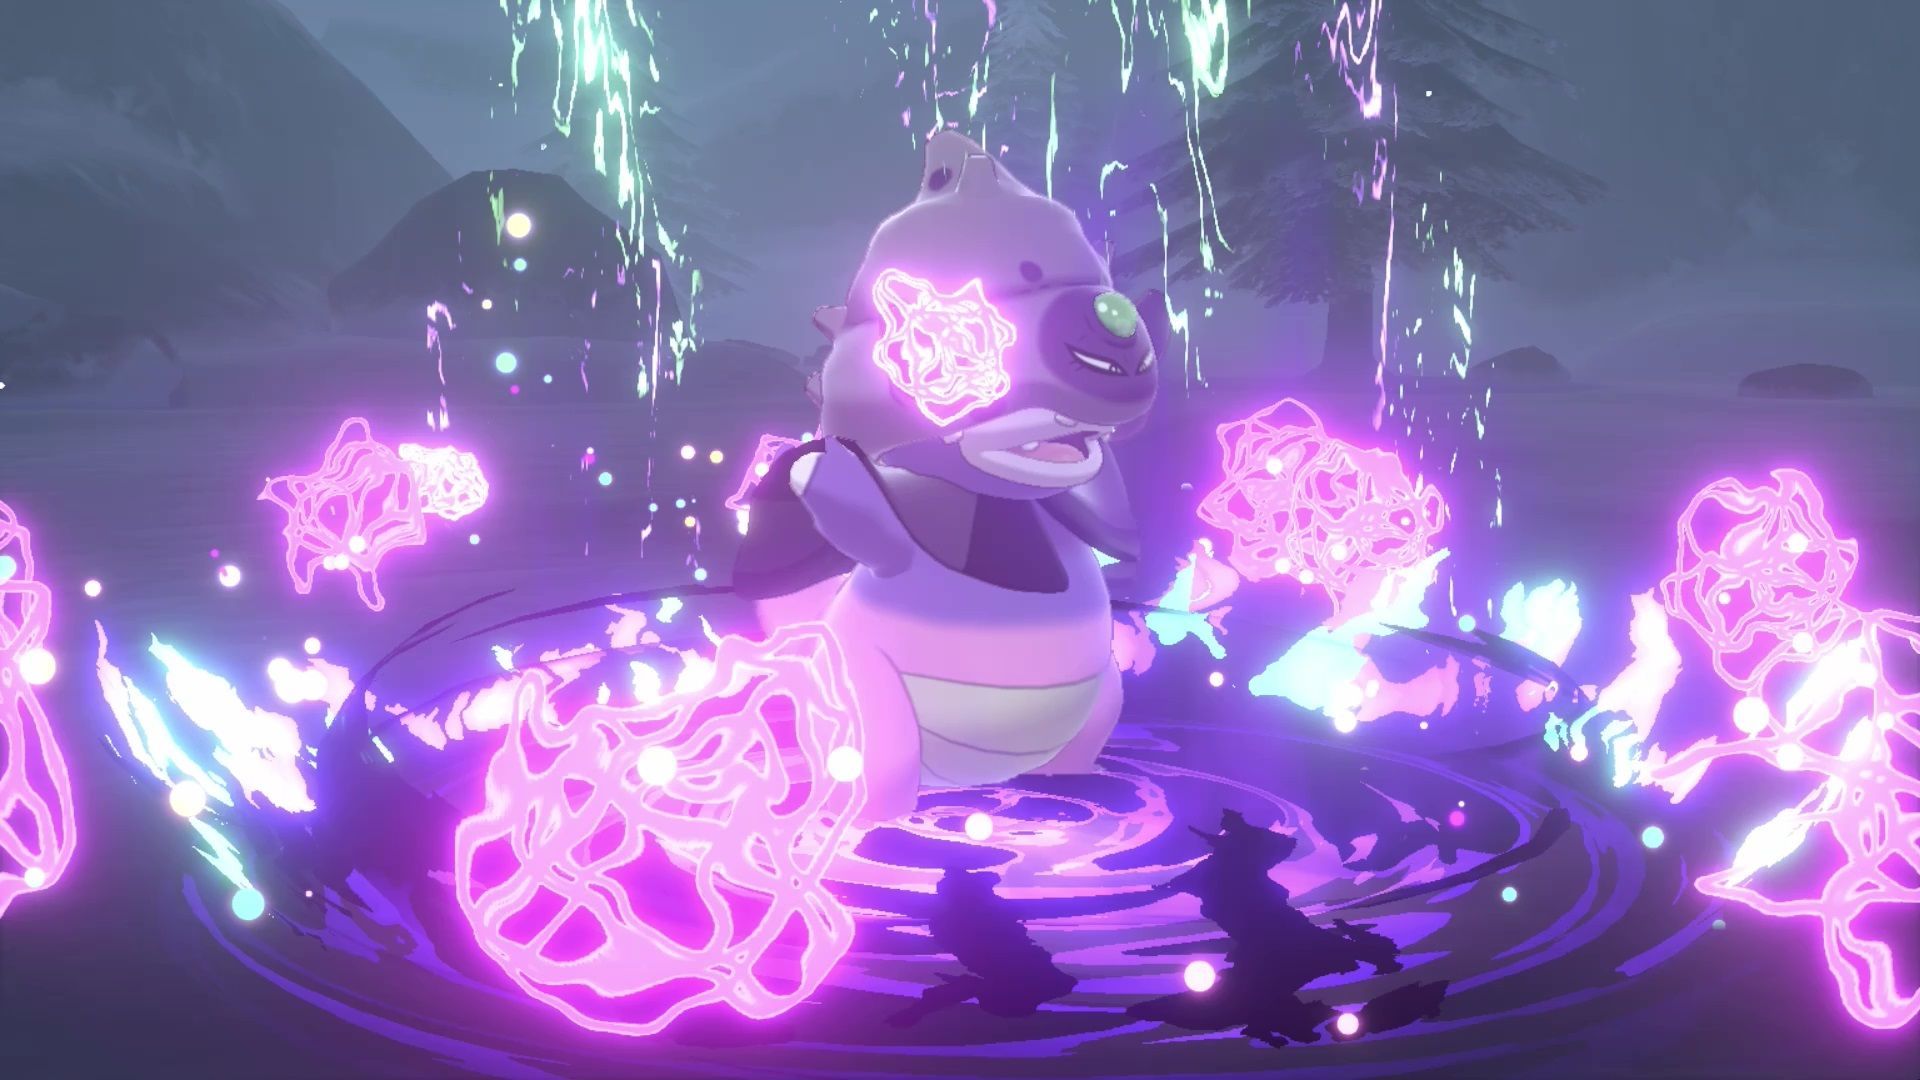 Geek Review - Pokémon Sword and Shield: The Crown Tundra DLC